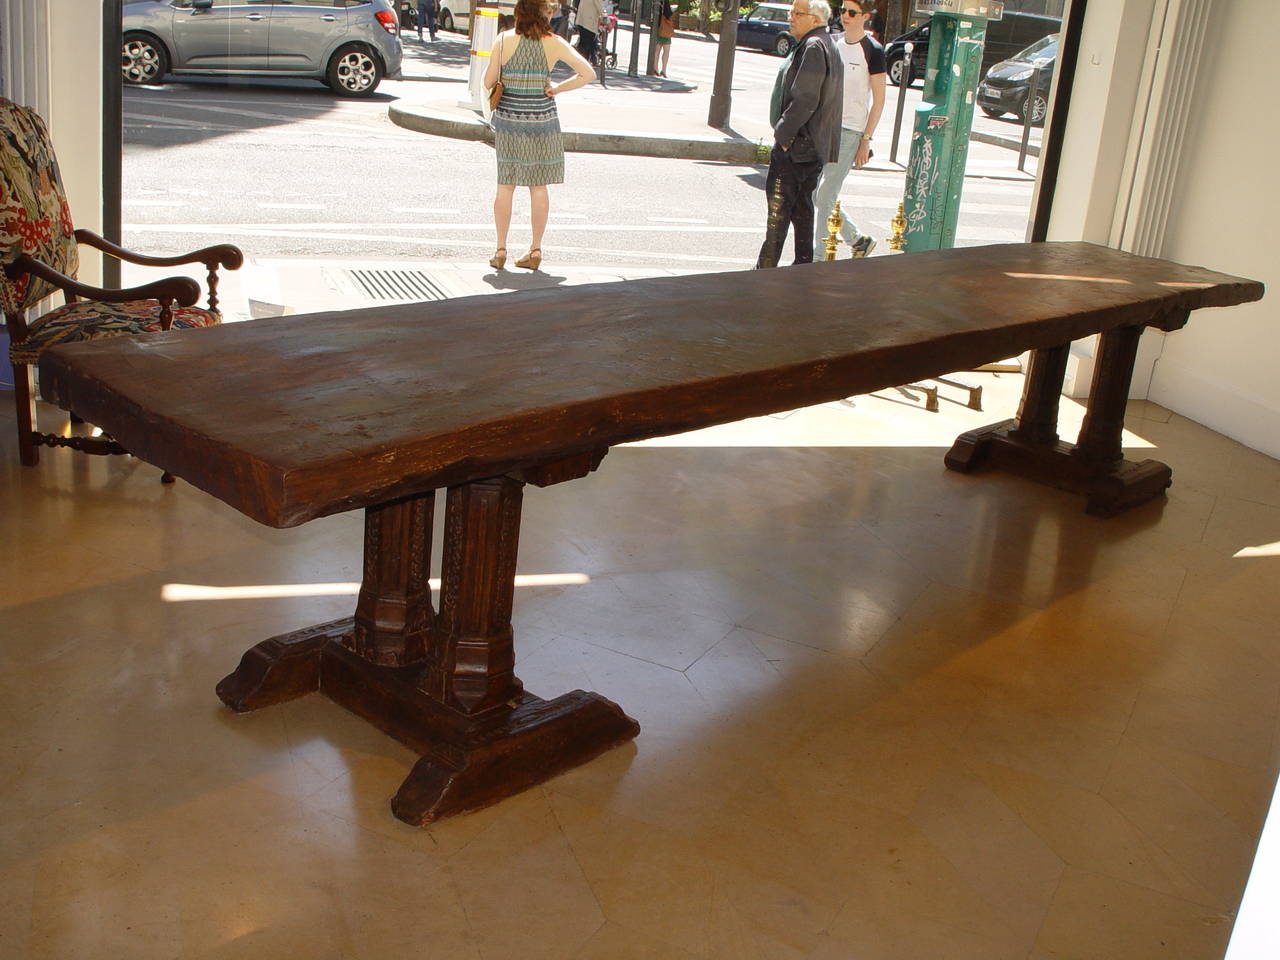 Huge castle furniture table.
Top in walnut and base in chestnut tree,
Spain,
Late 16th-early 17th century.
Dimensions: L 169in x D 30in x Ht 30.7in x top thickness 4in.
Service restoration. 

Huge Spanish table with one piece top and double